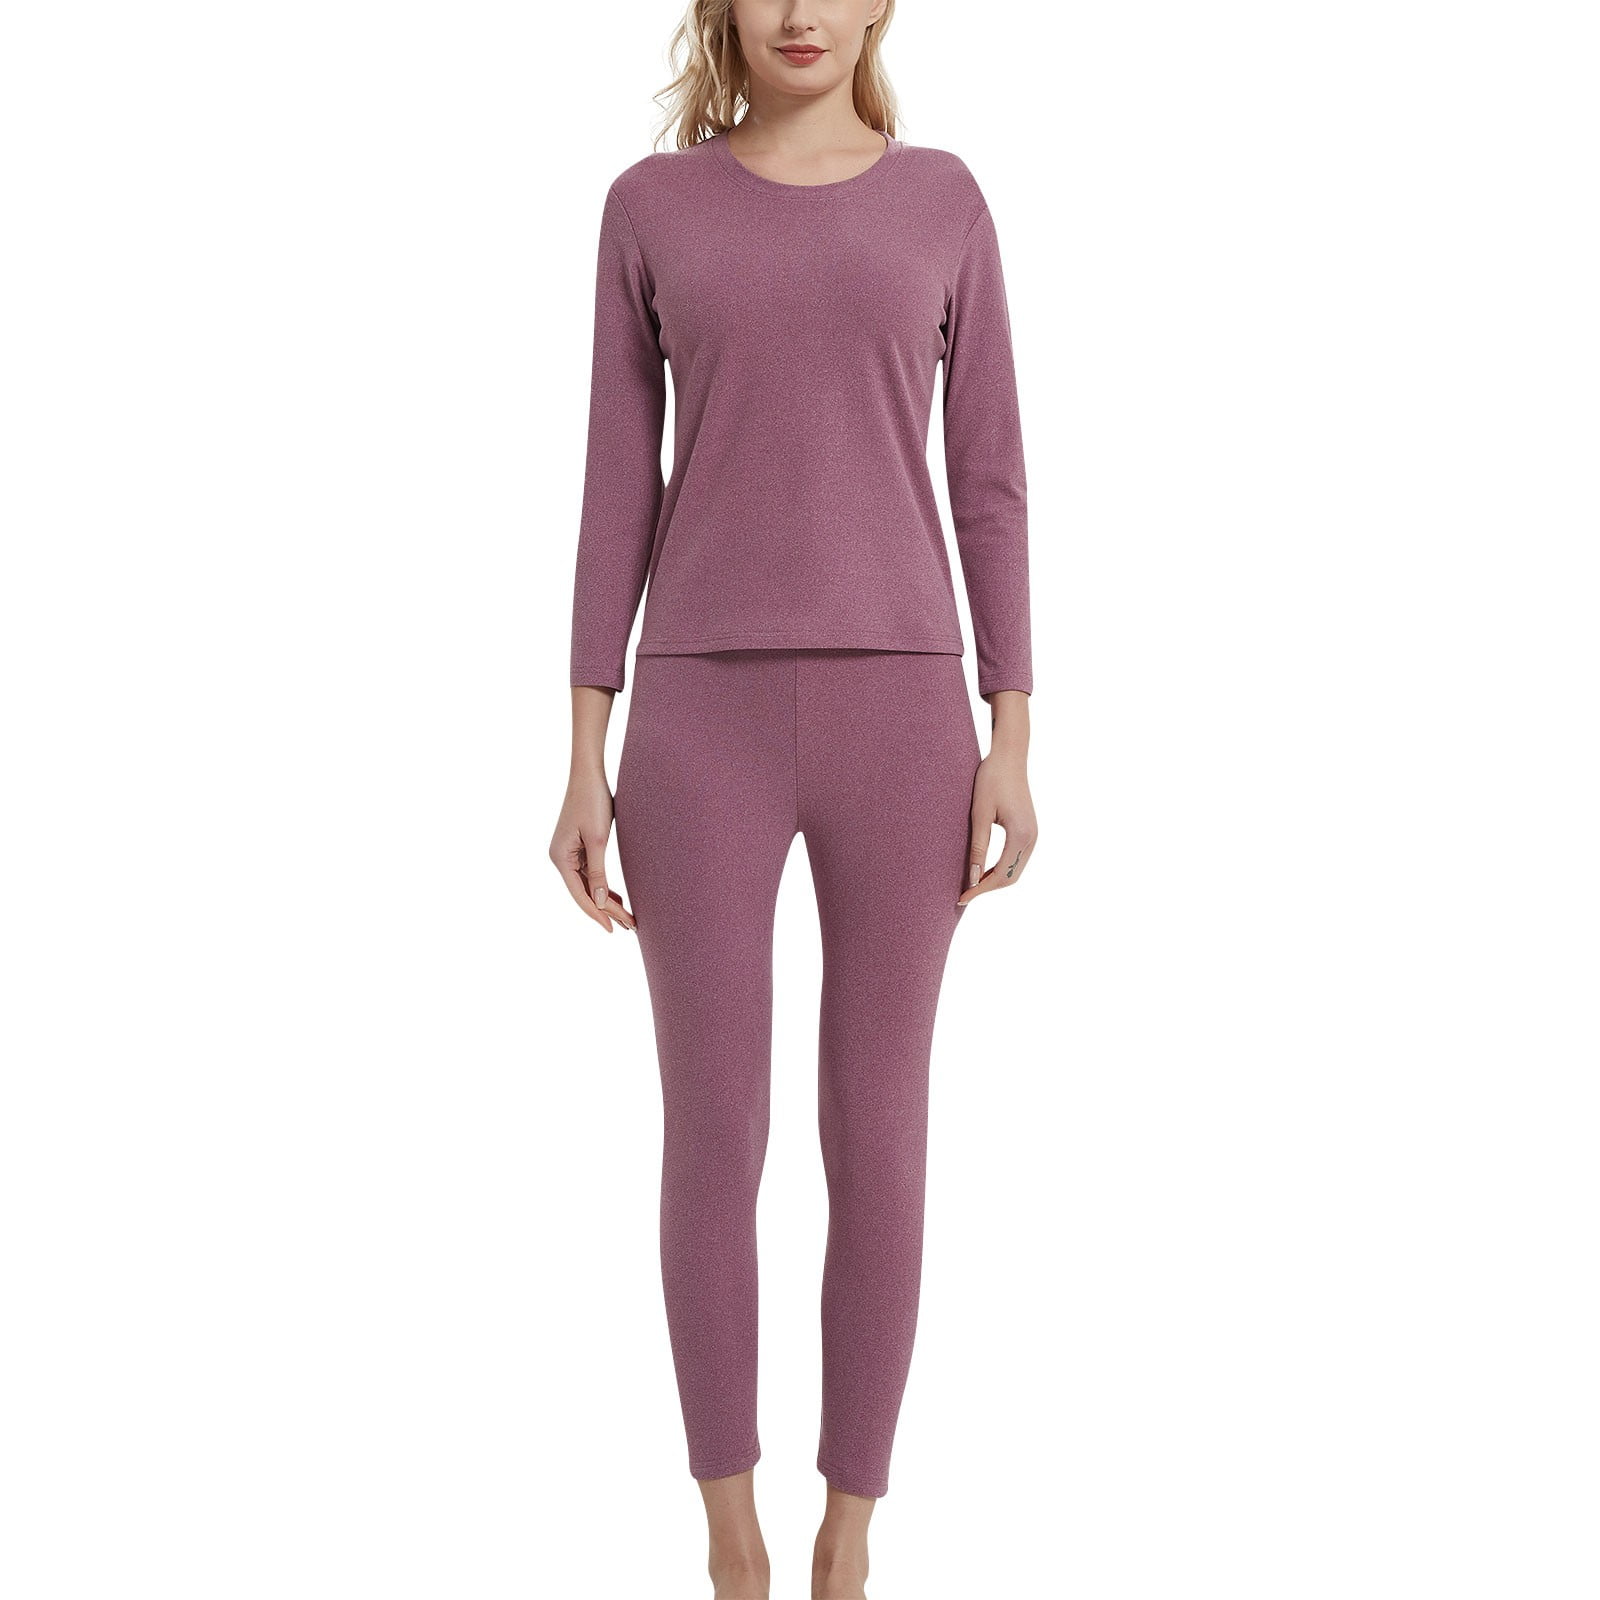 TQWQT Ultra Soft Thermal Underwear for Women, Long Johns 2 Set with Fleece  Lined ,Cold Weather Base layer Warm Top & Bottom